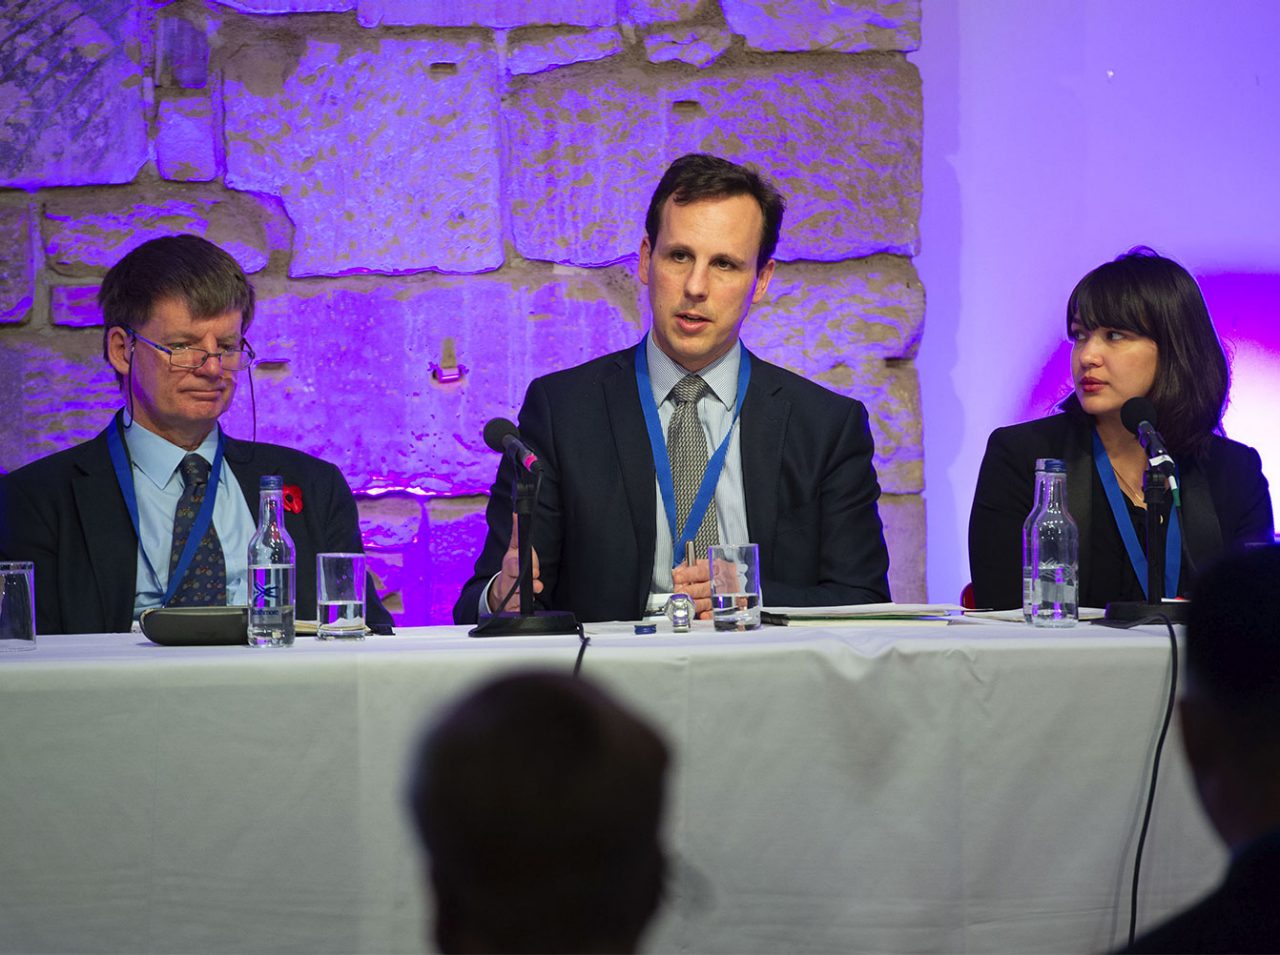 Adrian Barnes (centre), Senior Manager in the MAM Green Investments Green Impact Advisory team, speaks on a panel alongside Peter Young (left), Chair of ISO Sustainable Finance committee, and Yasmin Raza (right), Technical Specialist at the Financial Conduct Authority.